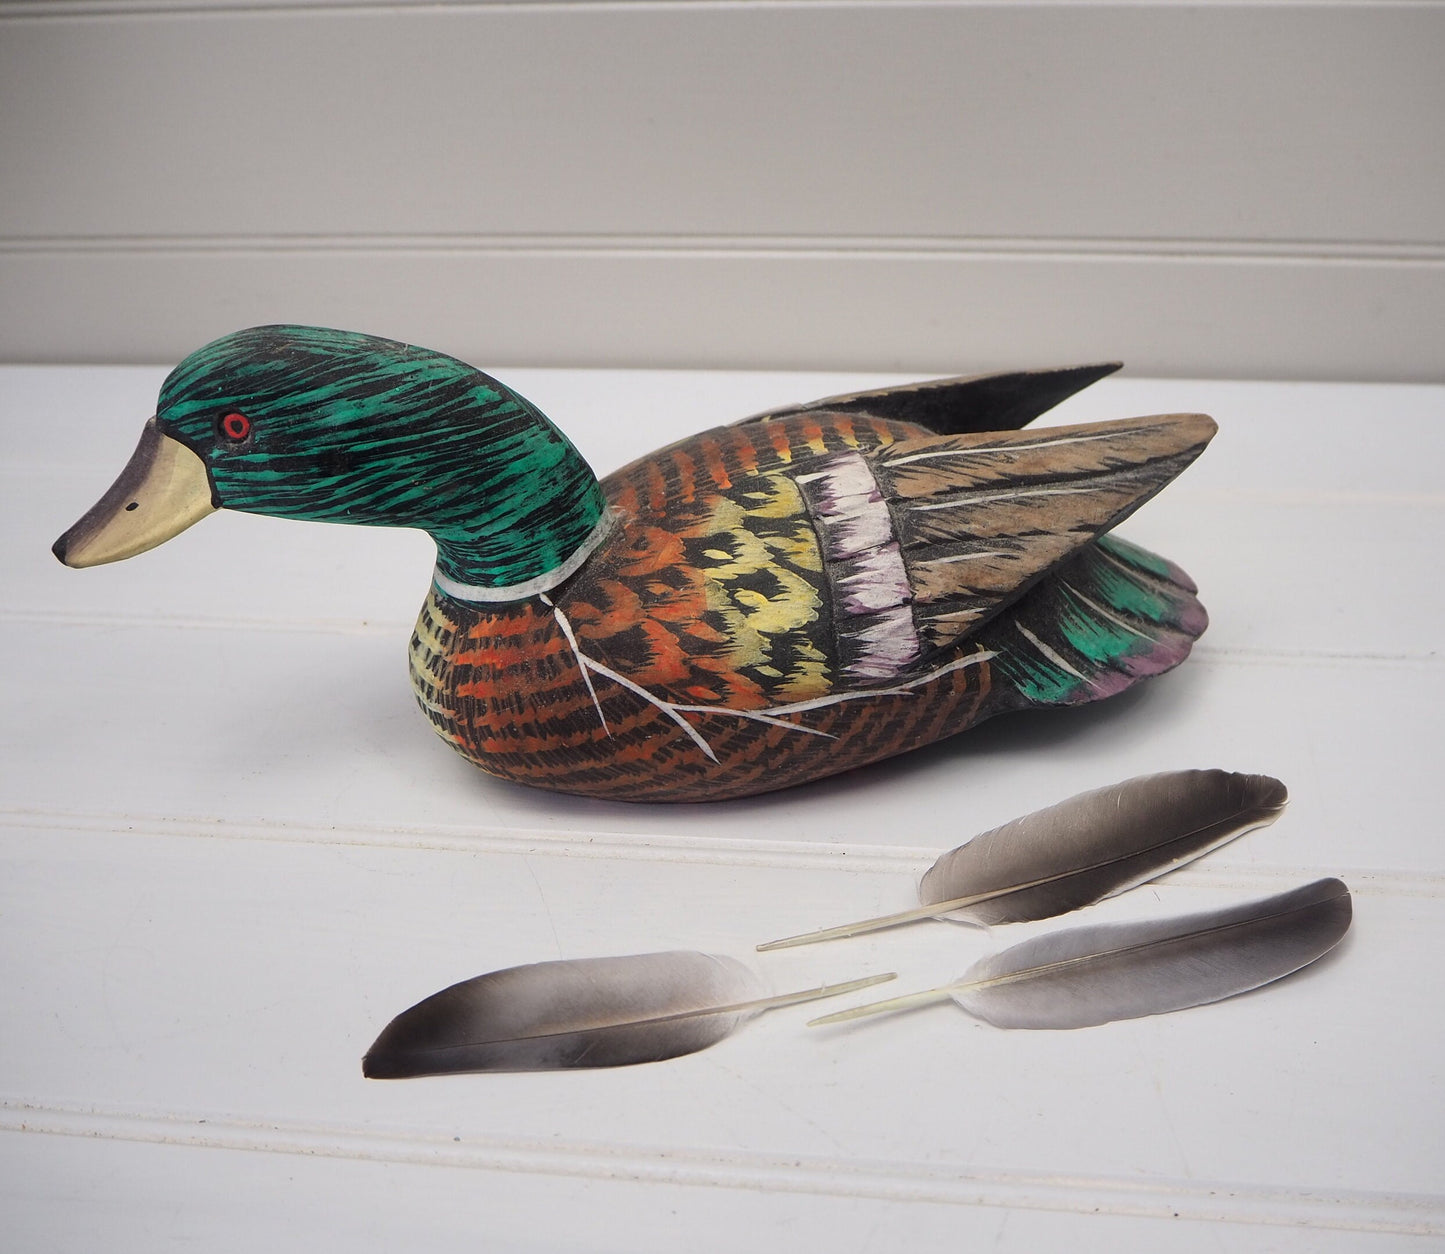 Vintage French painted wooden decoy duck Carved wooden full size Mallard duck Decorative antique Ideal gift